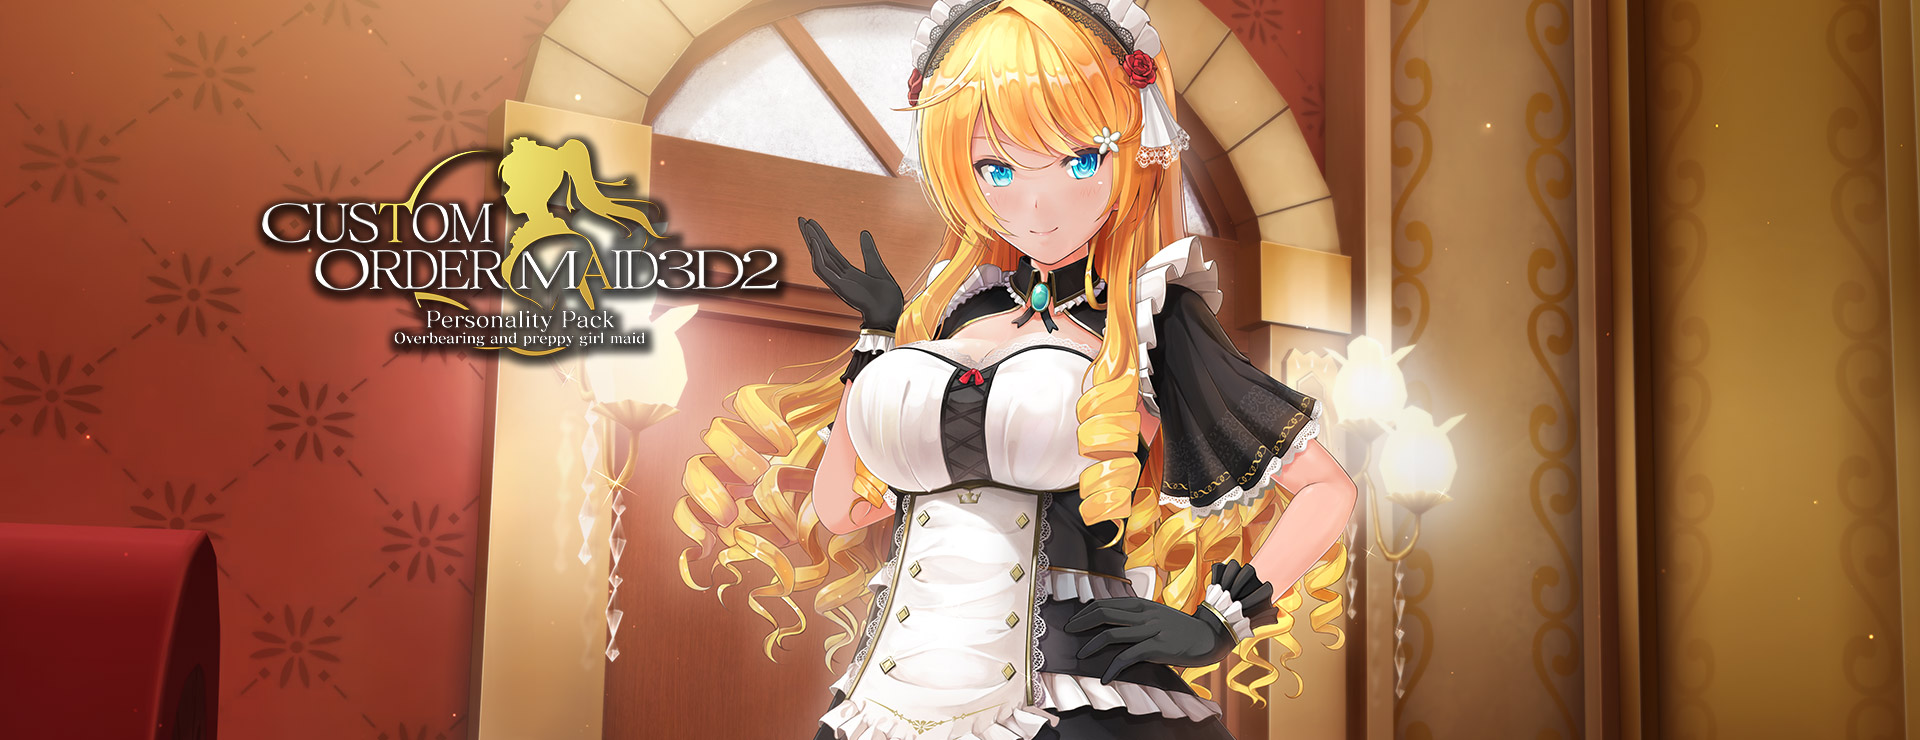 Custom Order Maid 3D 2: Overbearing and Preppy Girl Maid Complete Bundle - Simulation Spiel